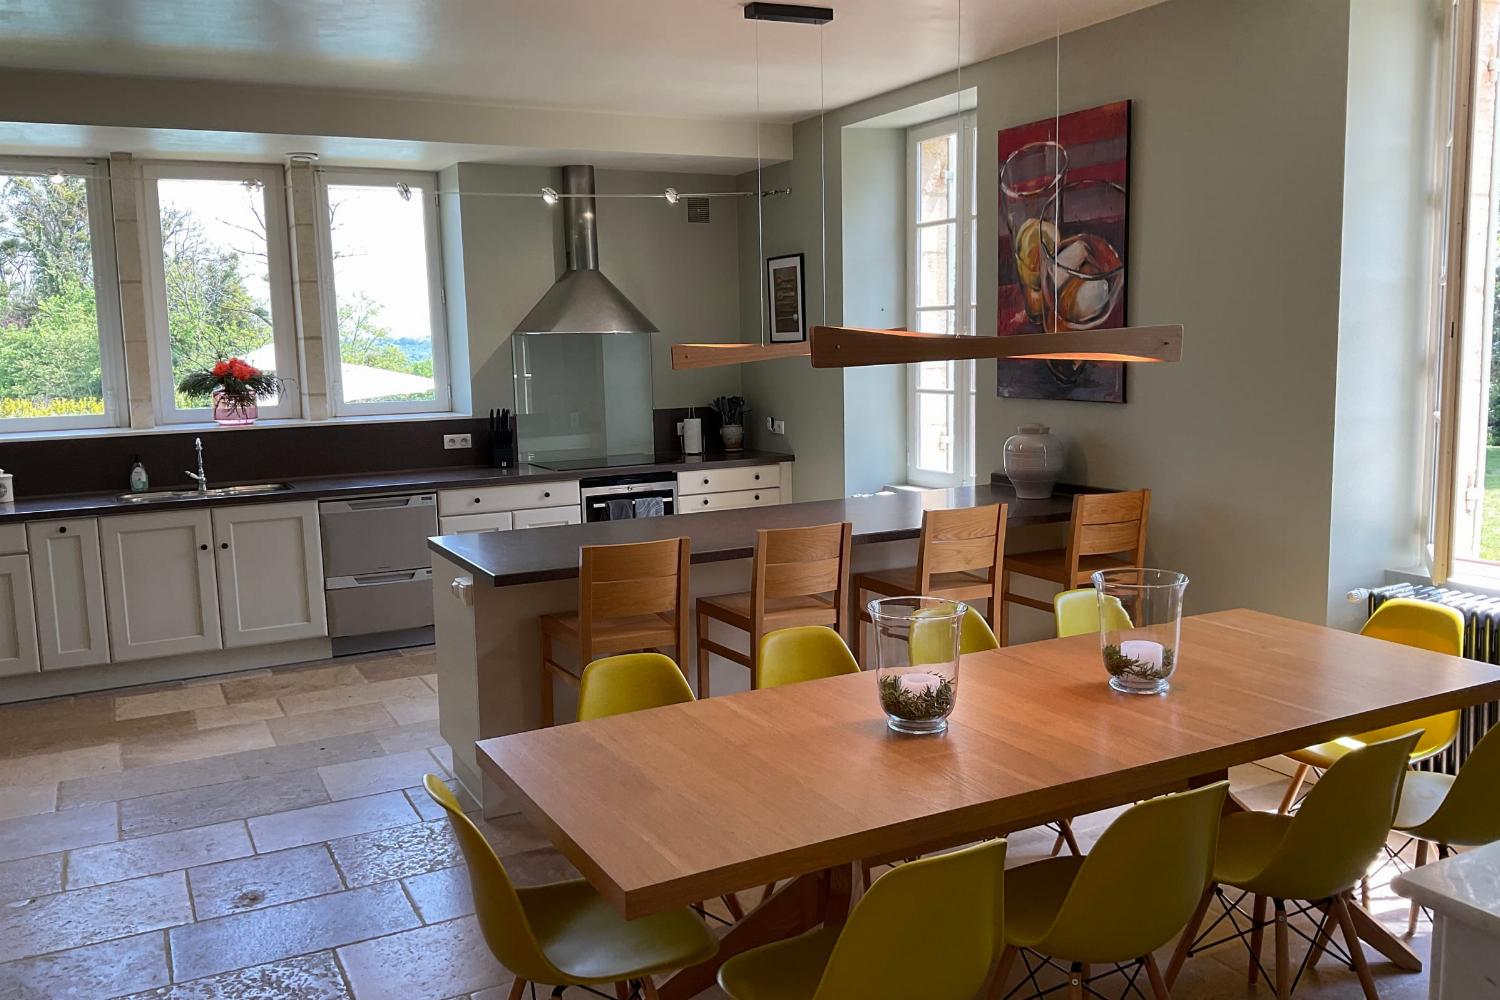 Kitchen | Rental accommodation in Nouvelle-Aquitaine